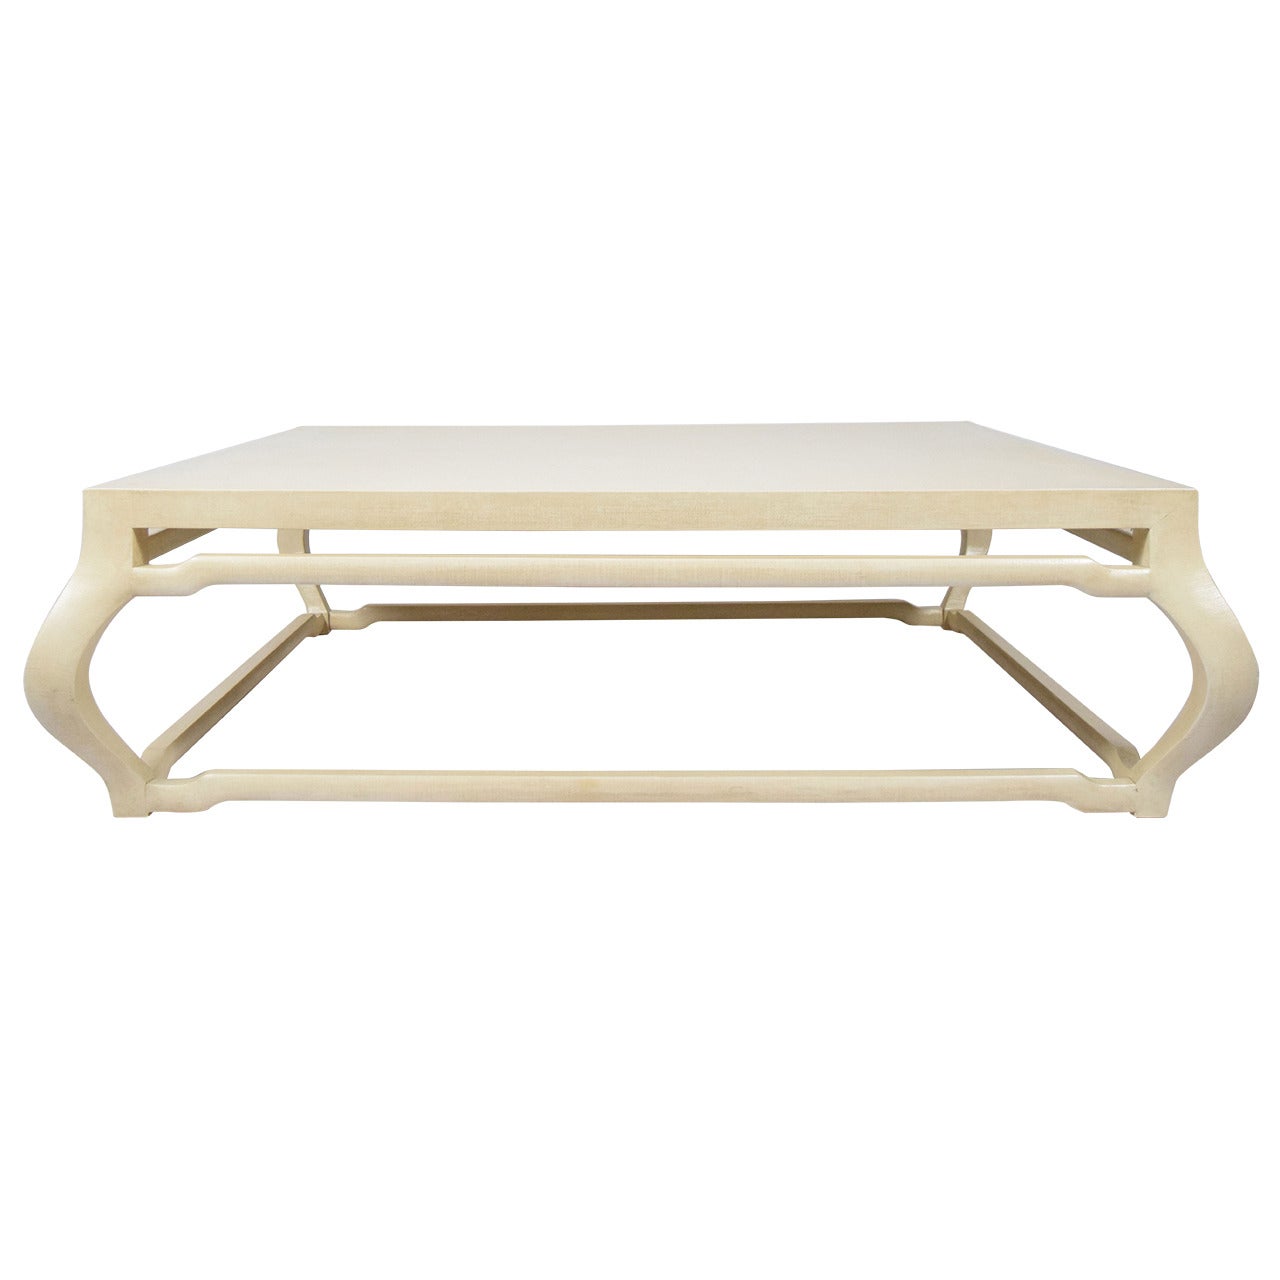 J. Robert Scott Ming Coffee Table in Lacquered Grasscloth